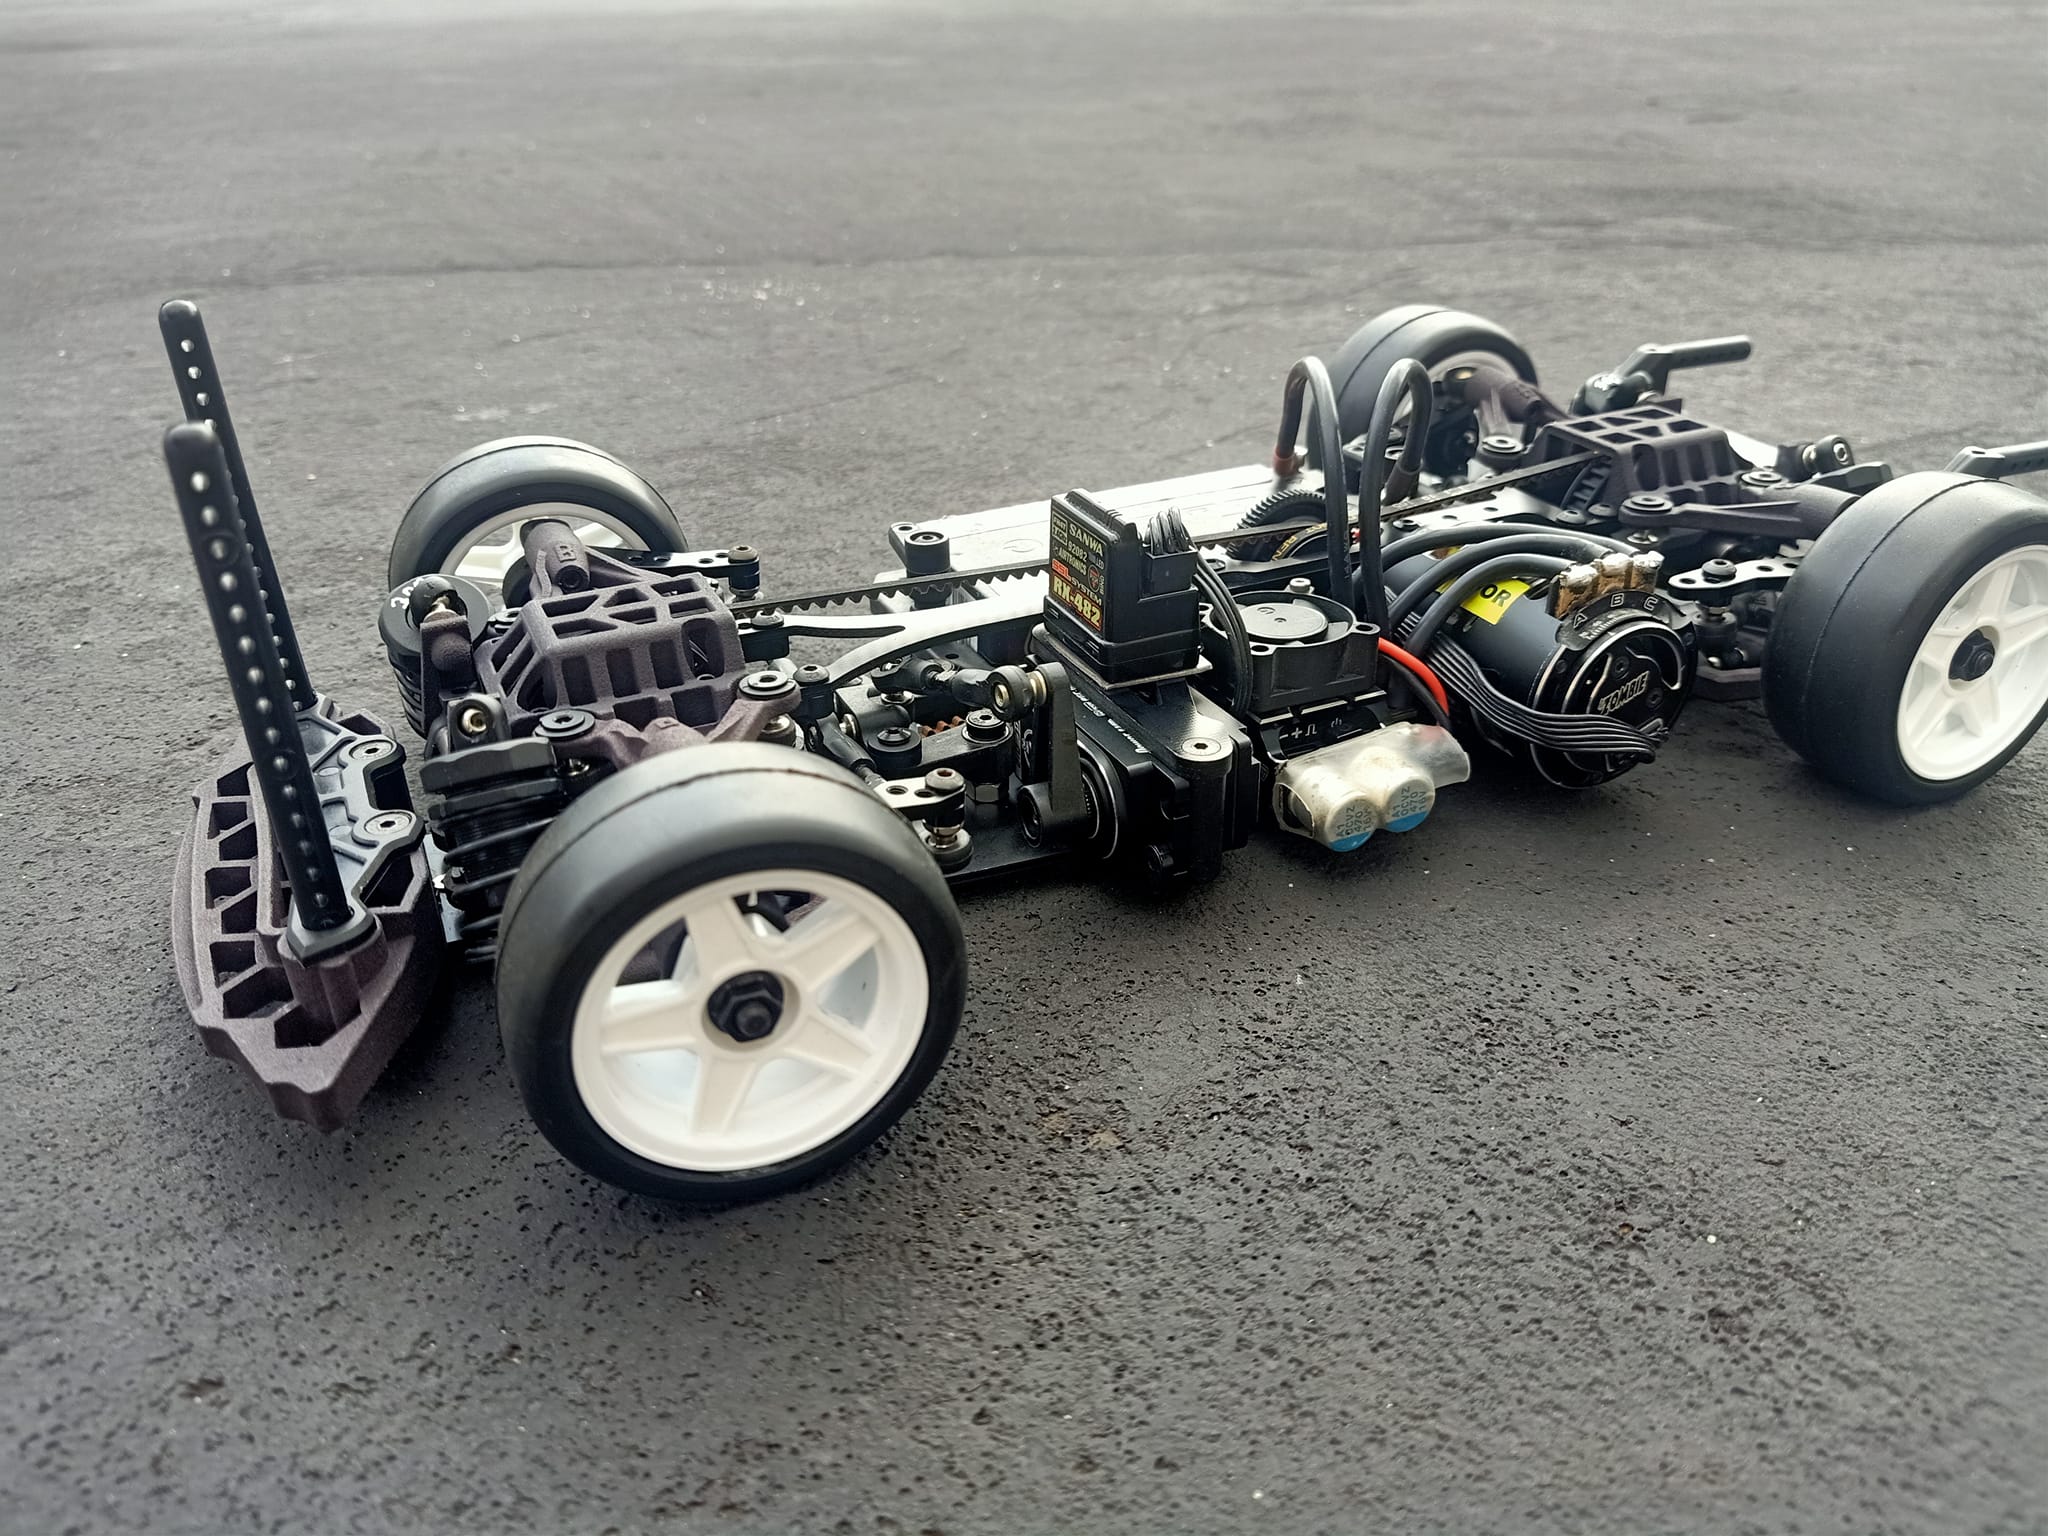 3Racing　CERO m-chassis(210mm）プロトタイプを公開